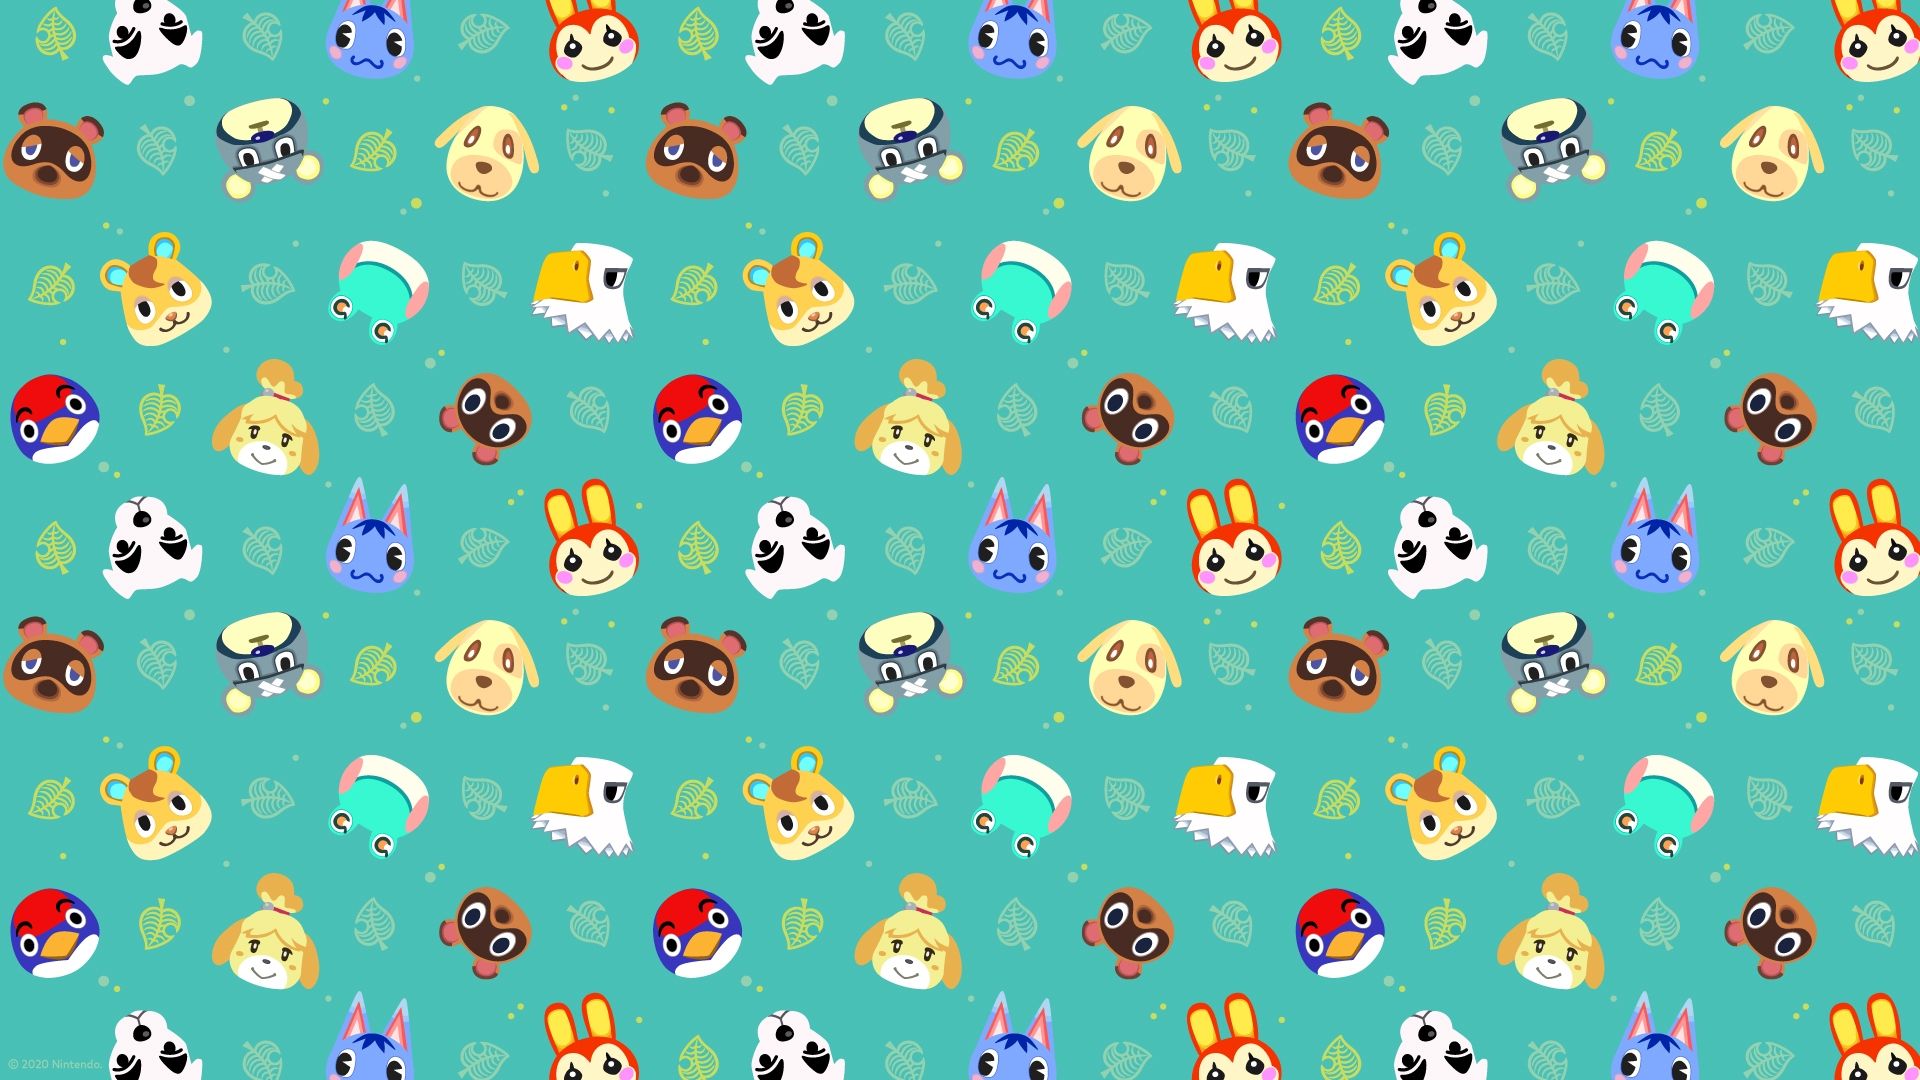 Wallpaper ID 327188  Video Game Animal Crossing New Horizons Phone  Wallpaper Timmy Animal Crossing Isabelle Animal Crossing Tommy Animal  Crossing Tom Nook 1440x2560 free download